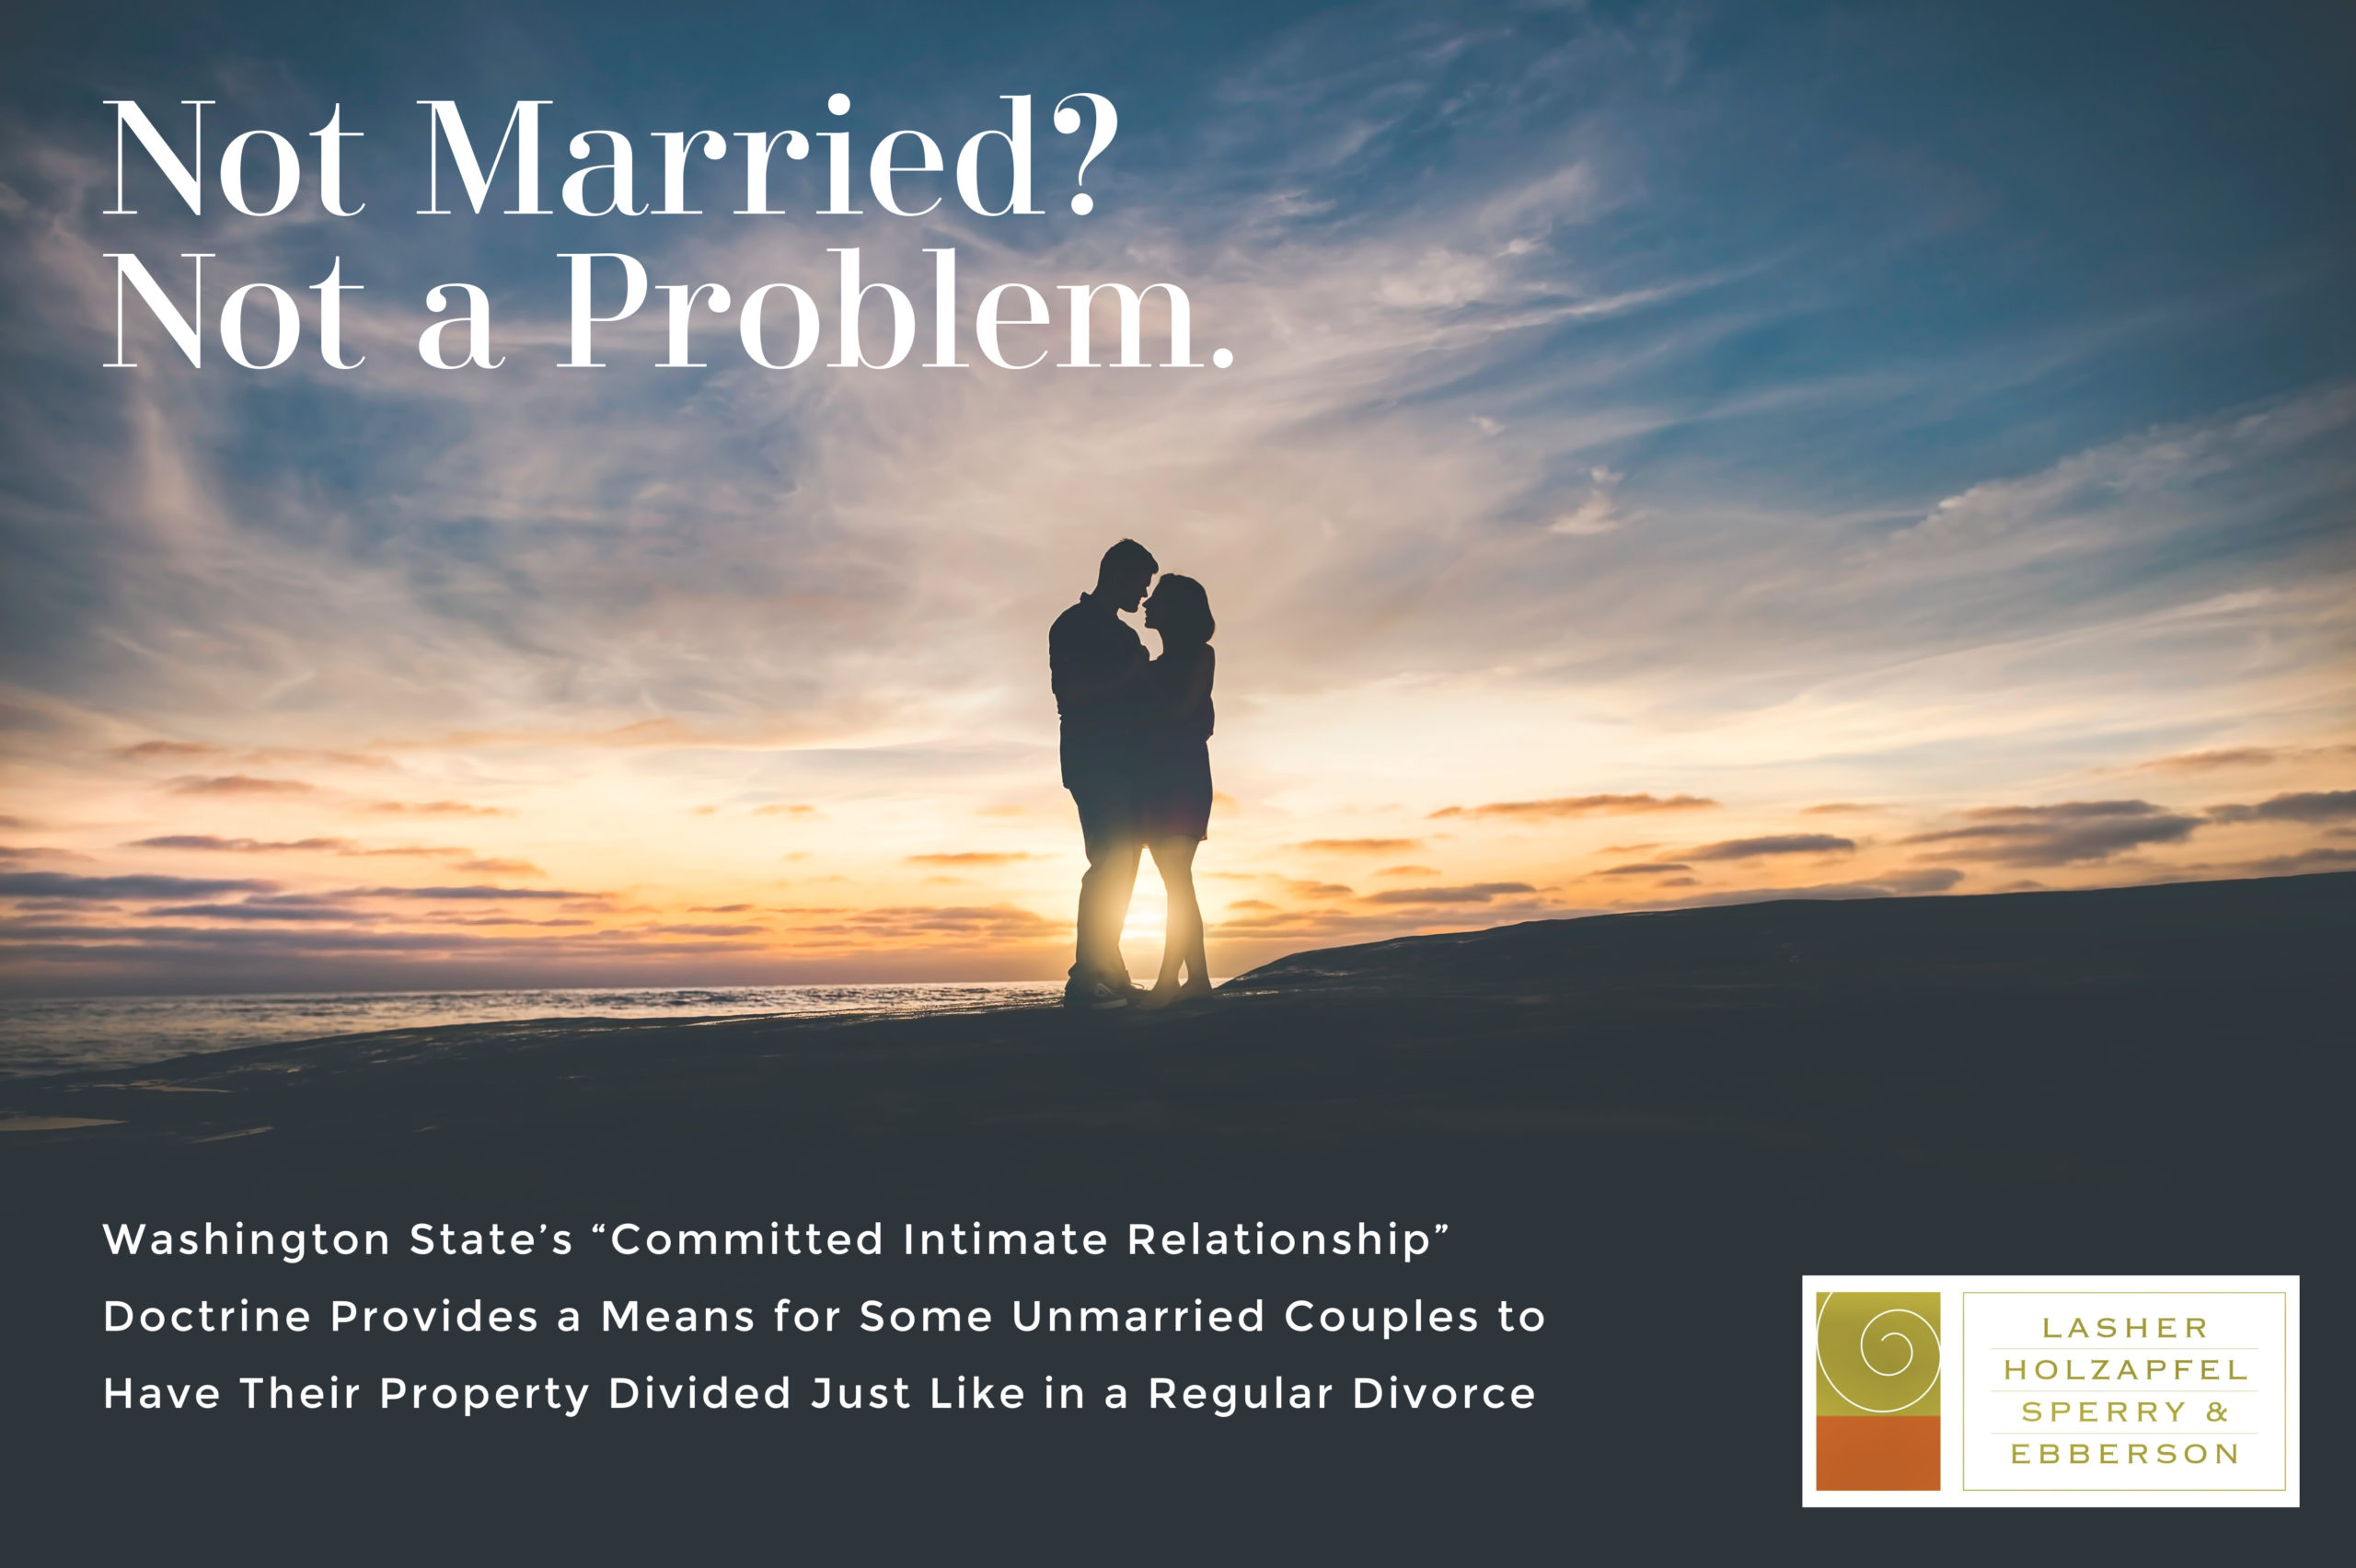 Not Married, Not a Problem:  Washington State’s “Committed Intimate Relationship” Doctrine Provides a Means for Some Unmarried Couples to Have Their Property Divided Just Like in a Regular Divorce